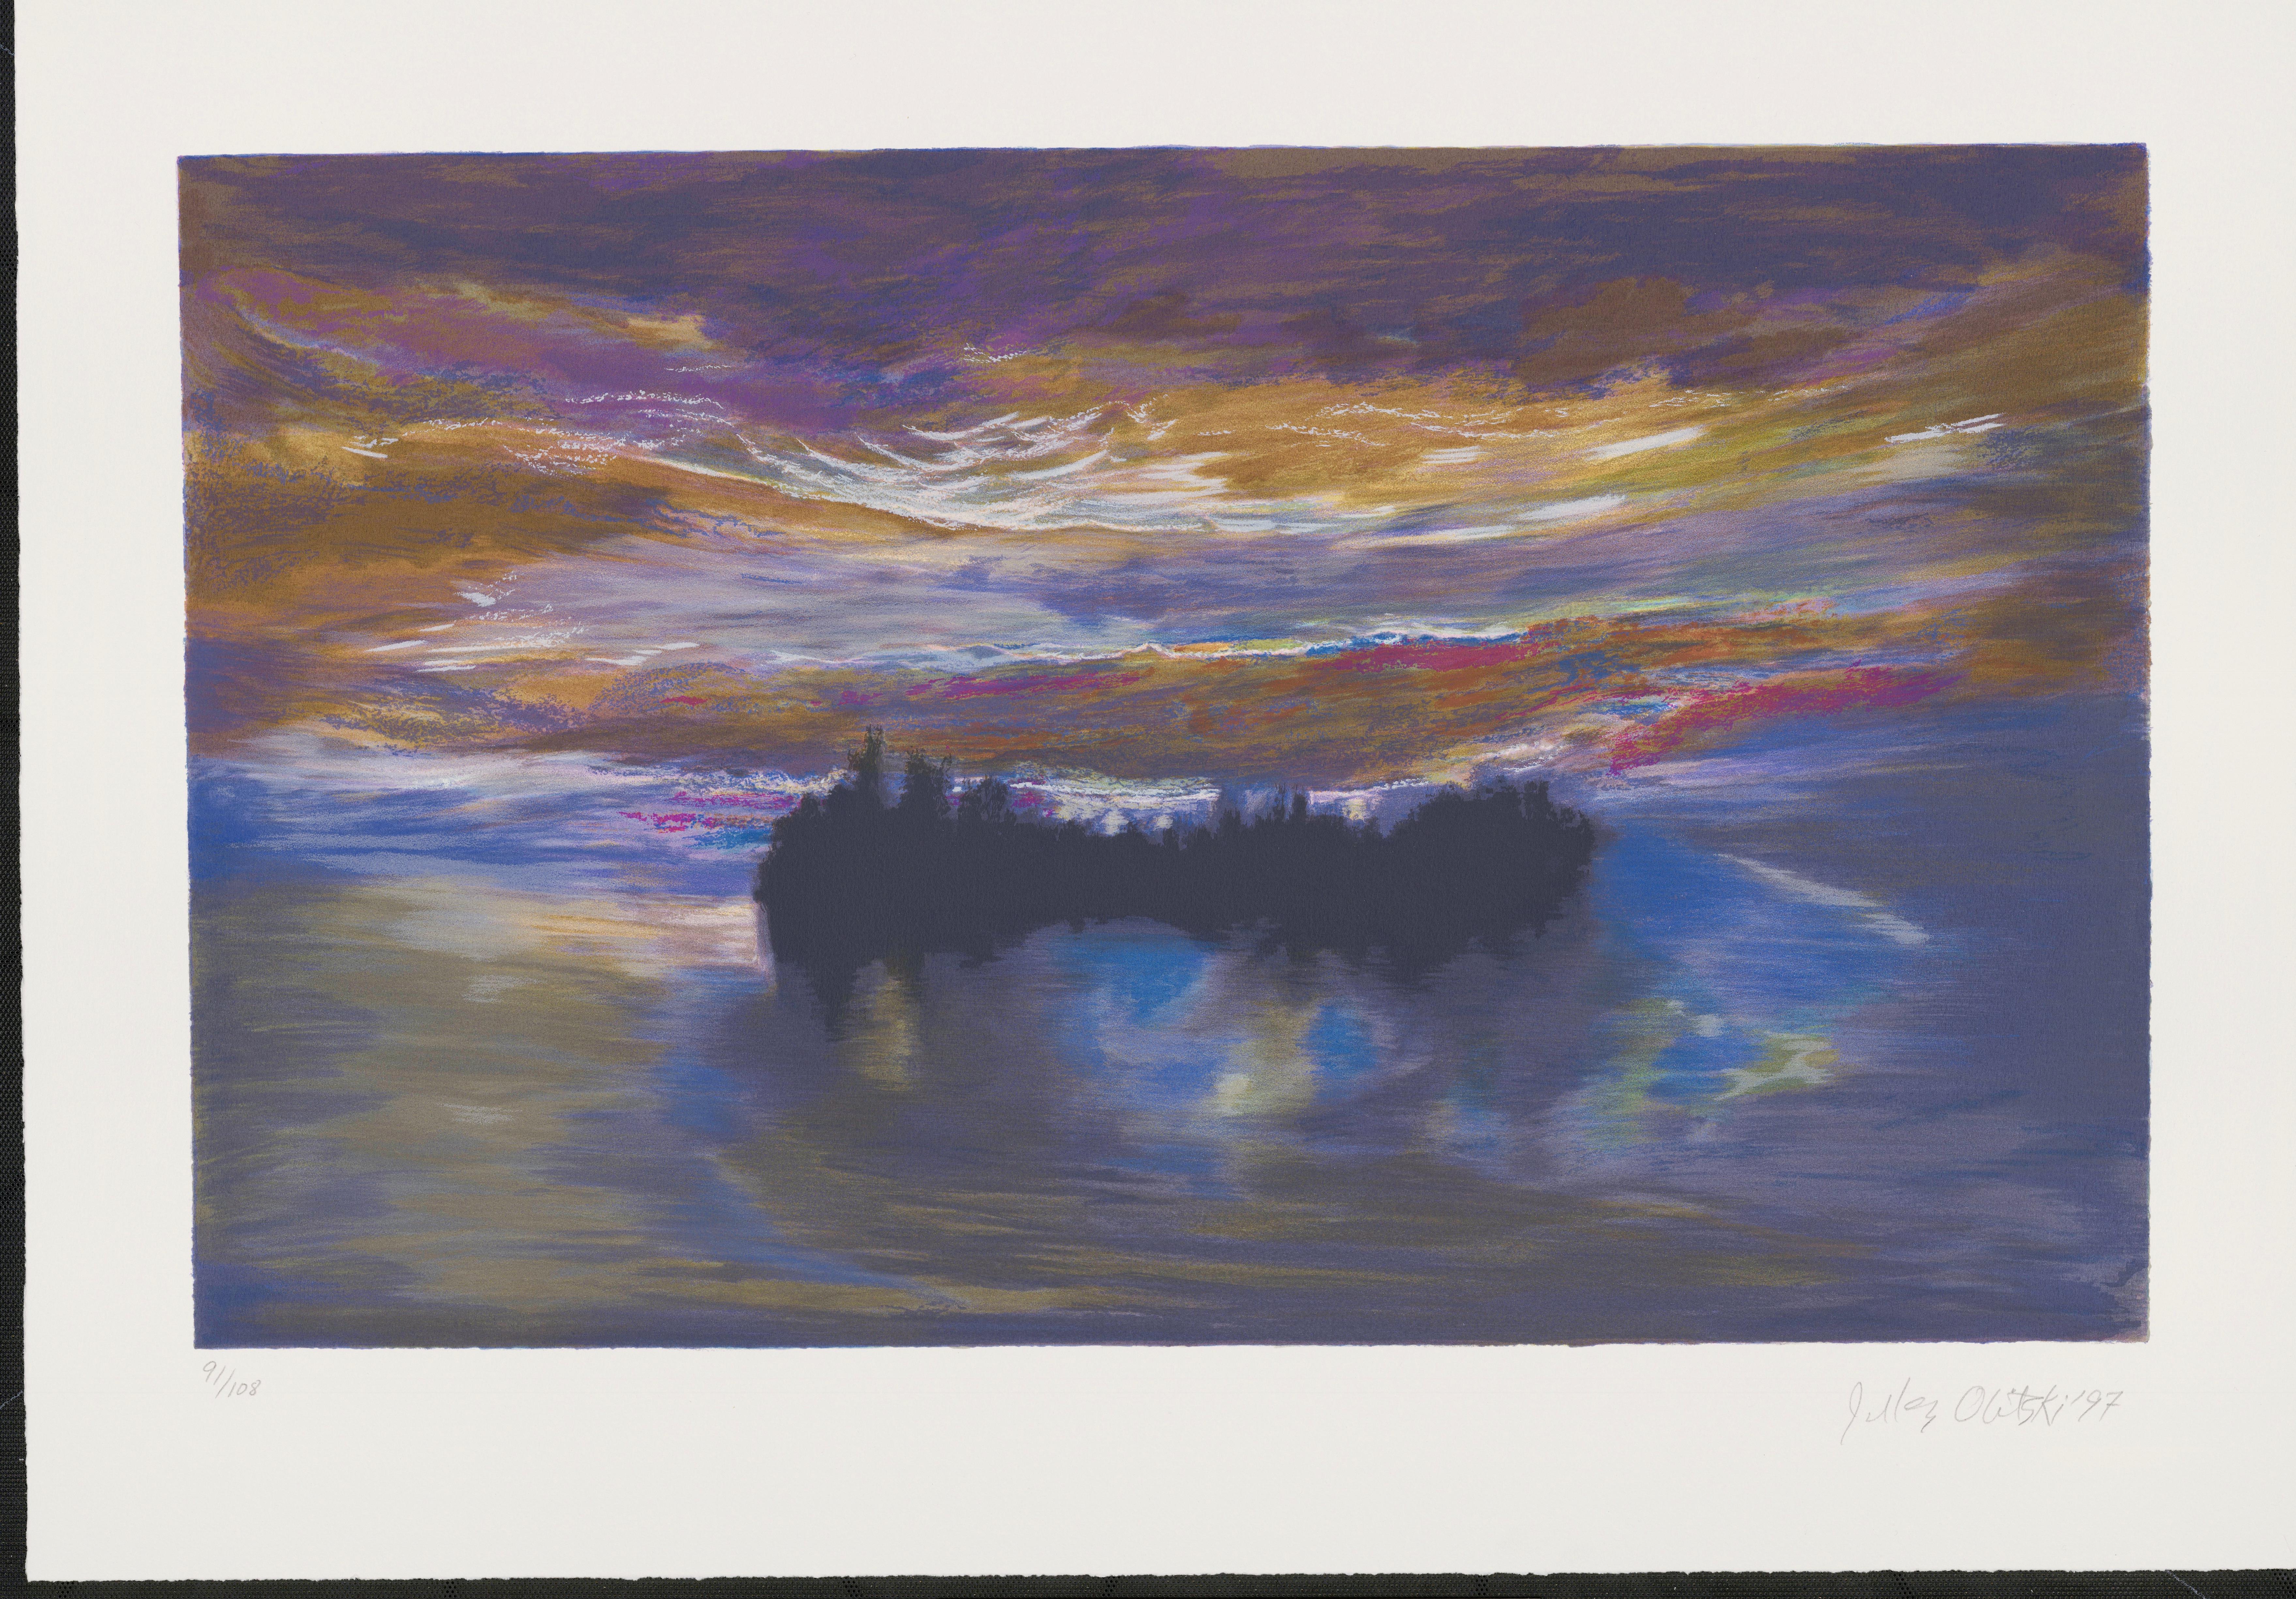 Jules Olitski
LUMINOUS DAWN (from Vera List Print Program, Mostly Mozart, Lincoln Center), 1997
Silkscreen on wove paper (Signed, dated, numbered)
Edition: 91/ 108
24 1/2 × 35 in
62.2 × 88.9 cm
$3000
Jevel Demikovski, known professionally as Jules